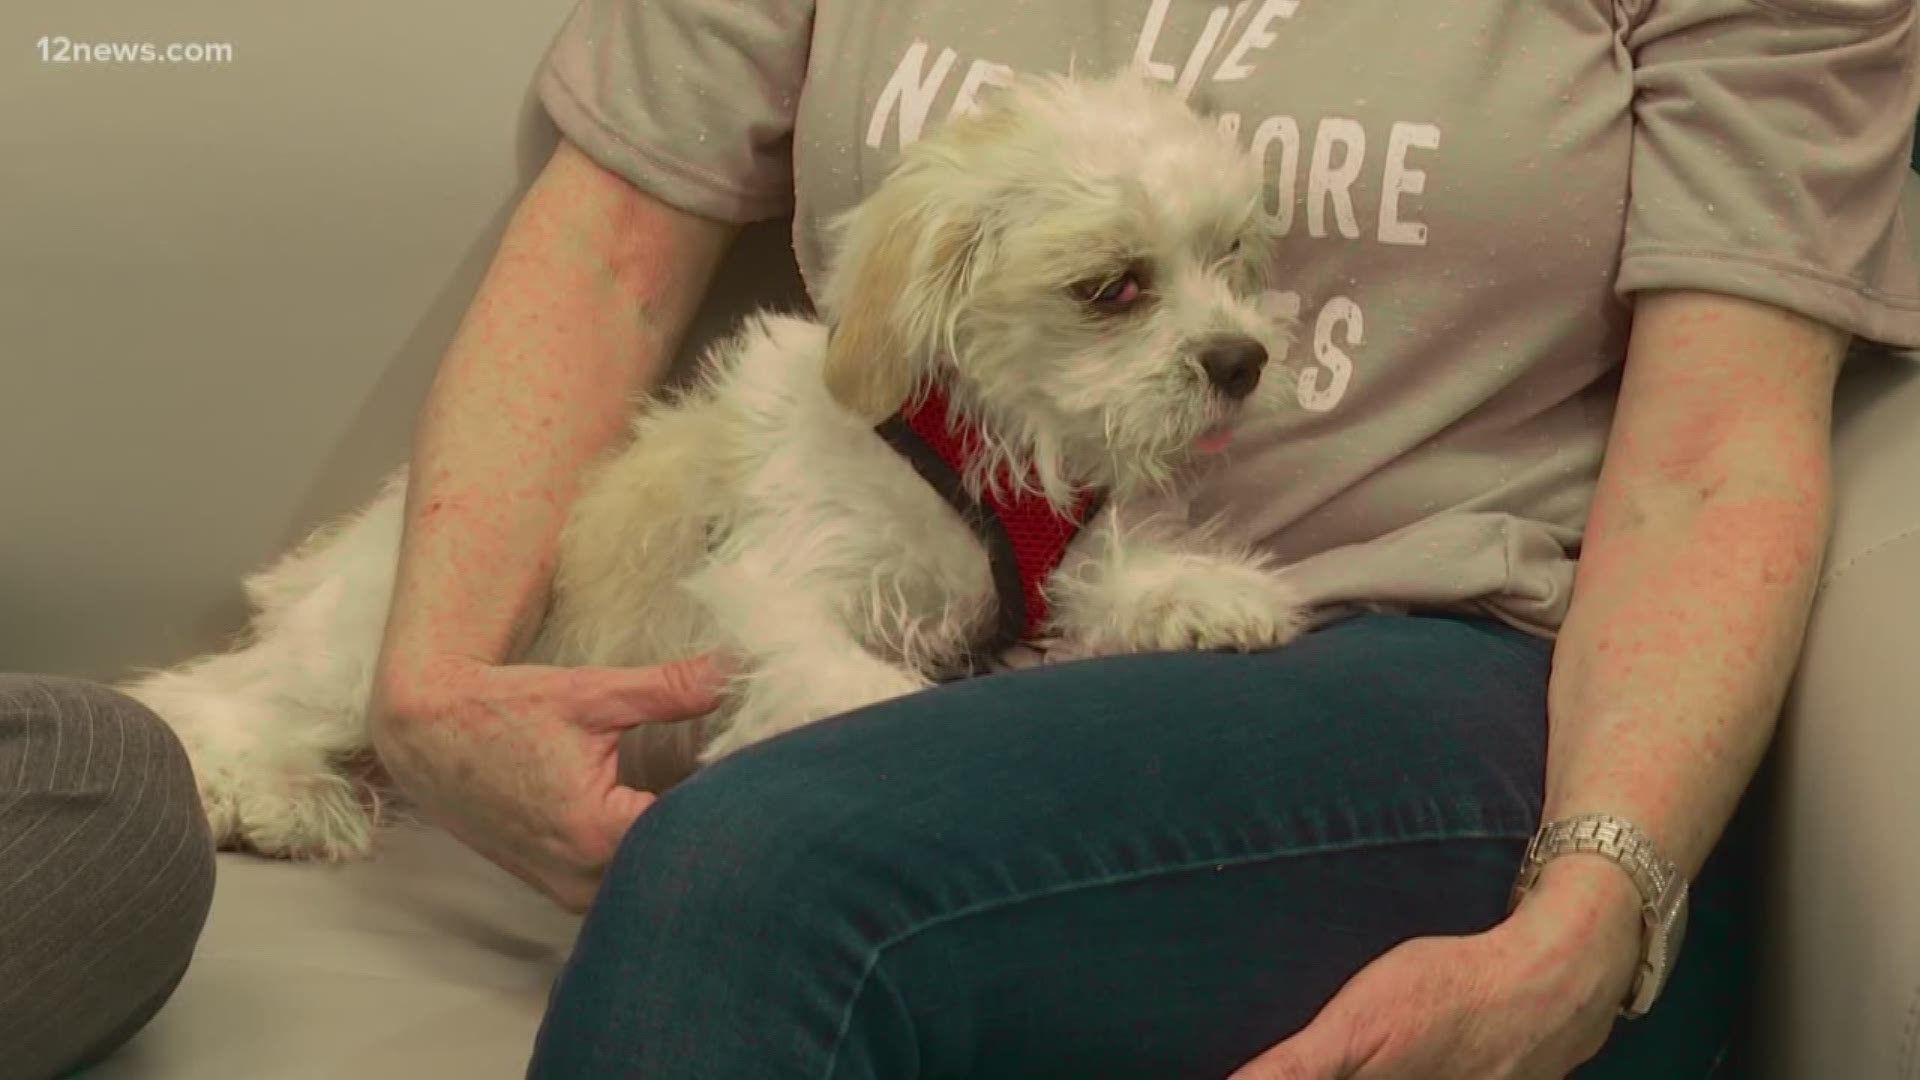 A small dog was found in the trash bin and is in need of surgery to repair an eye condition known as "cherry eye."